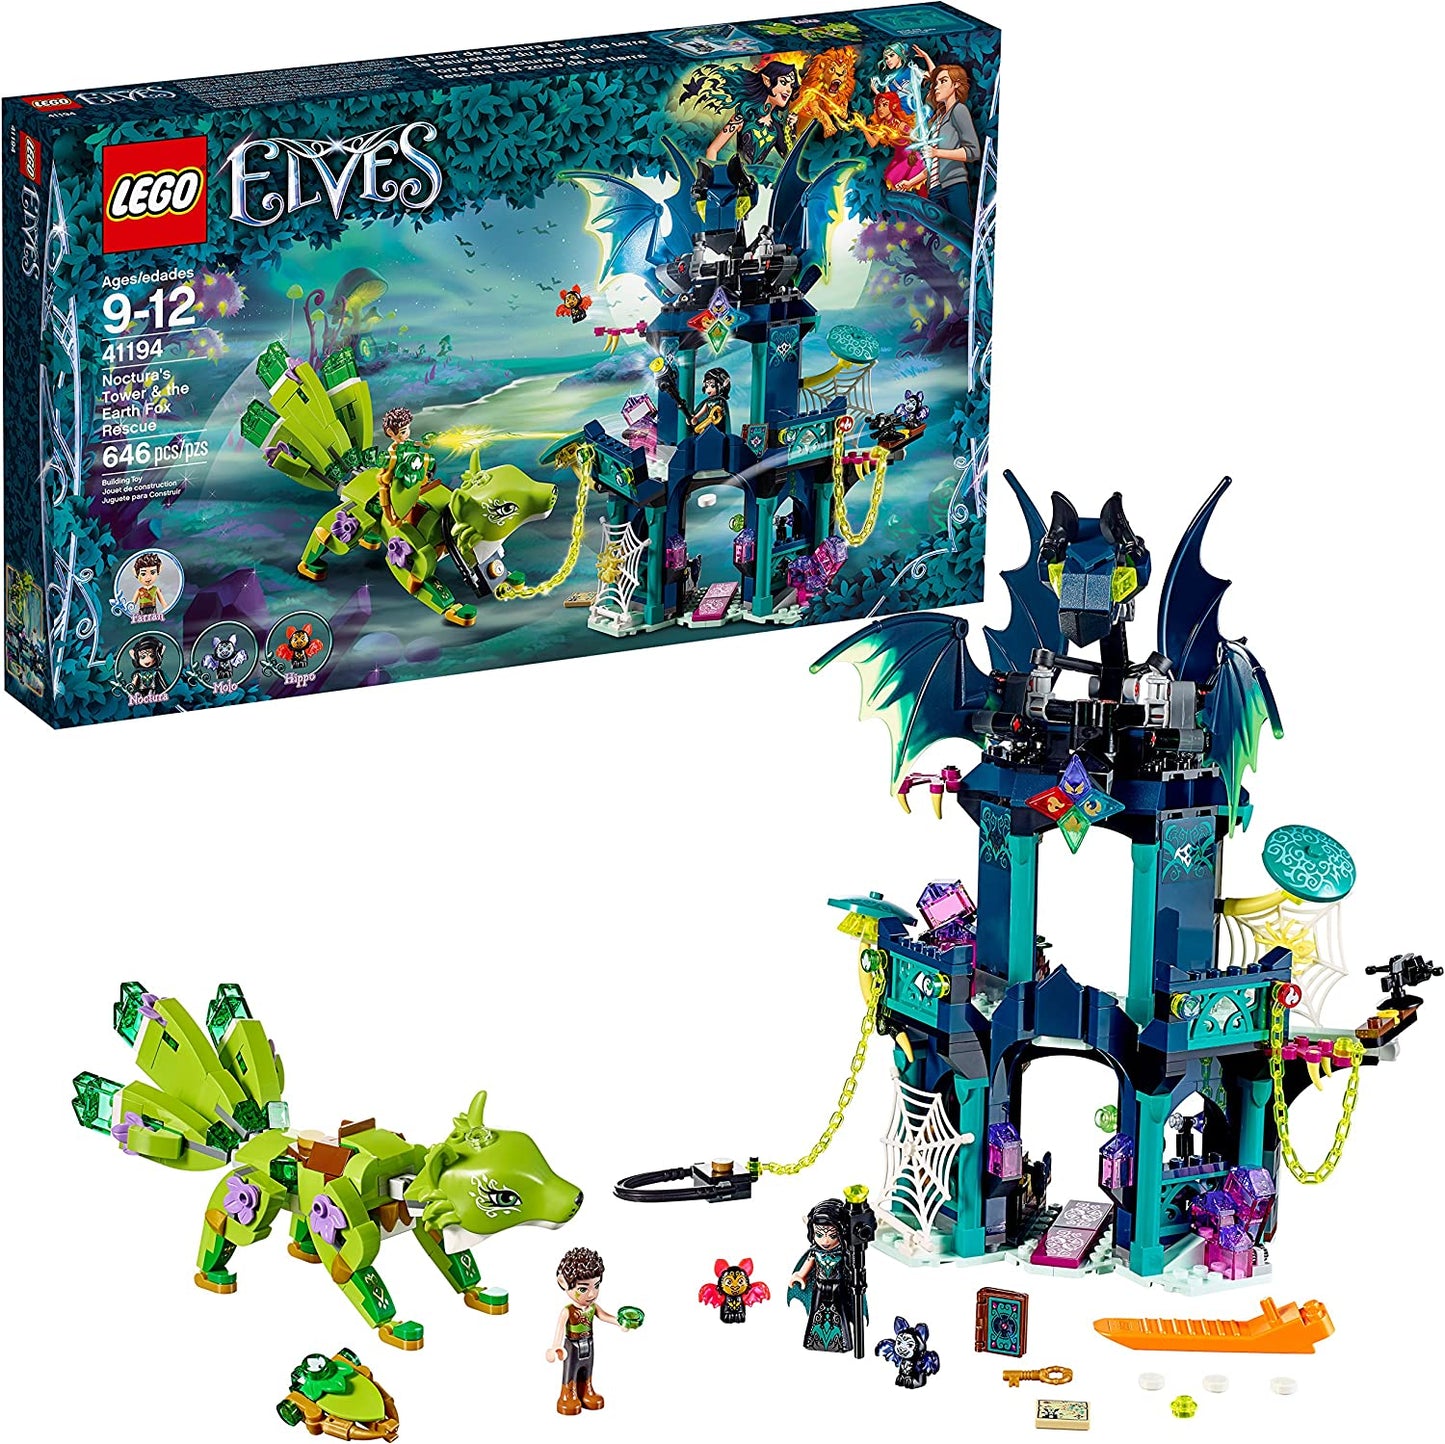 41194 Elves: Noctura's Tower and The Earth Fox Rescue - CERTIFIED